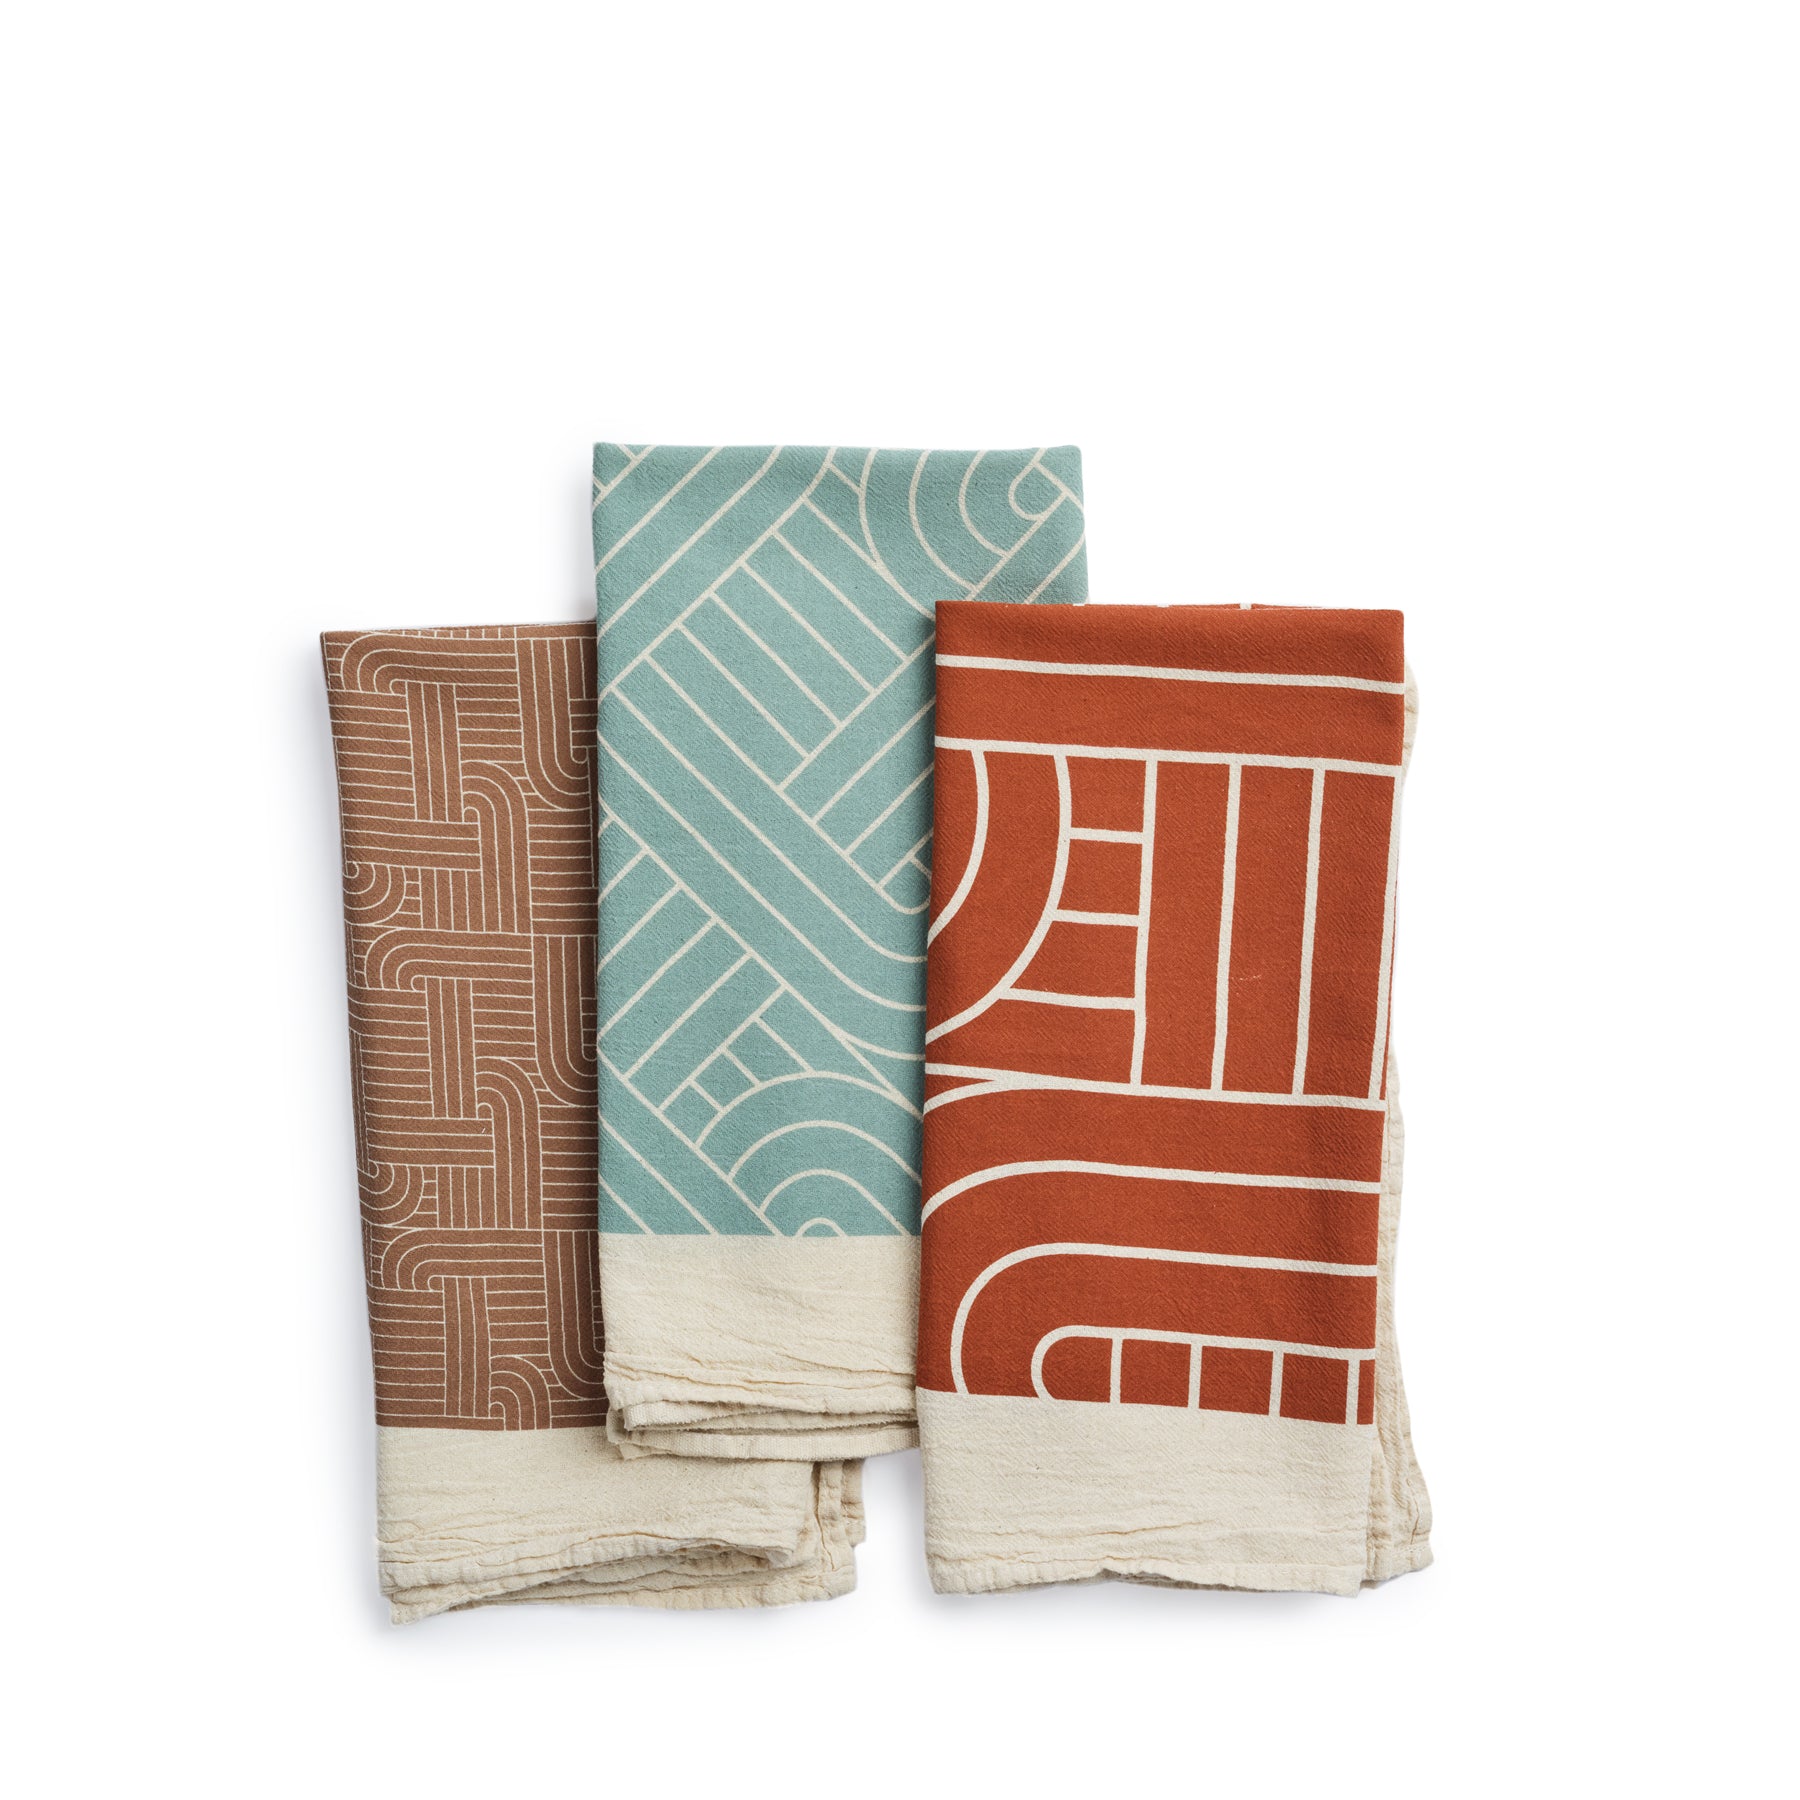 Chalet H Weave Tea Towels in Natural, Tomato, and Myrtle Green (Set of 3) Zoom Image 1